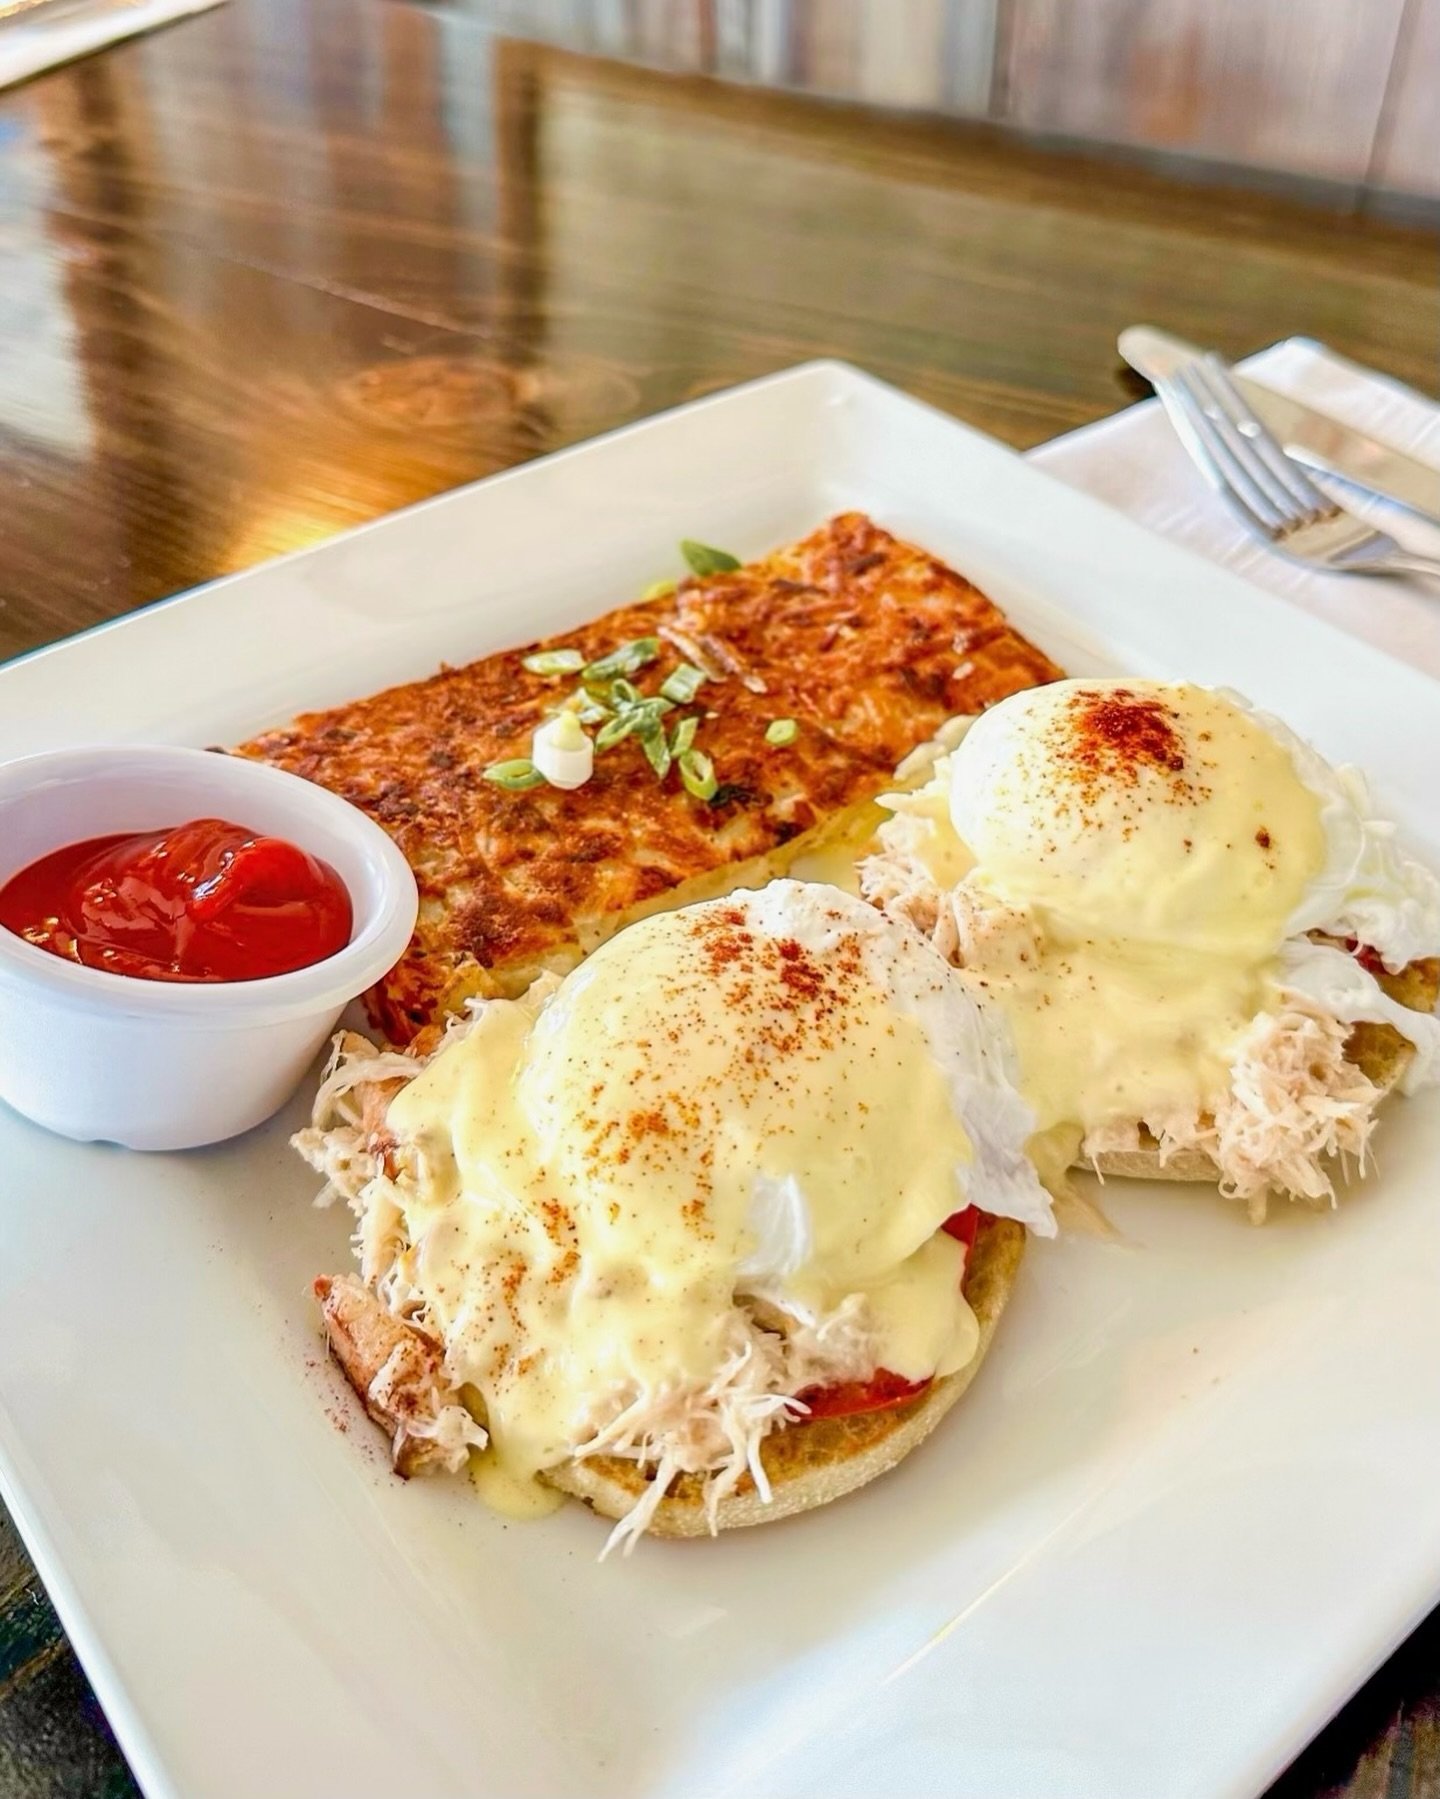 Rainy days call for cozy brunch at Ketch! Have you tried all our Benedict&rsquo;s yet?! 
🦀 Joanne Dungeness Crab (pictured above)
🍖 Ketch Prime Rib
🥑 Mushroom Avocado
🍣 Mezcal Cured Salmon
🍤 Cajun Garlic Shrimp